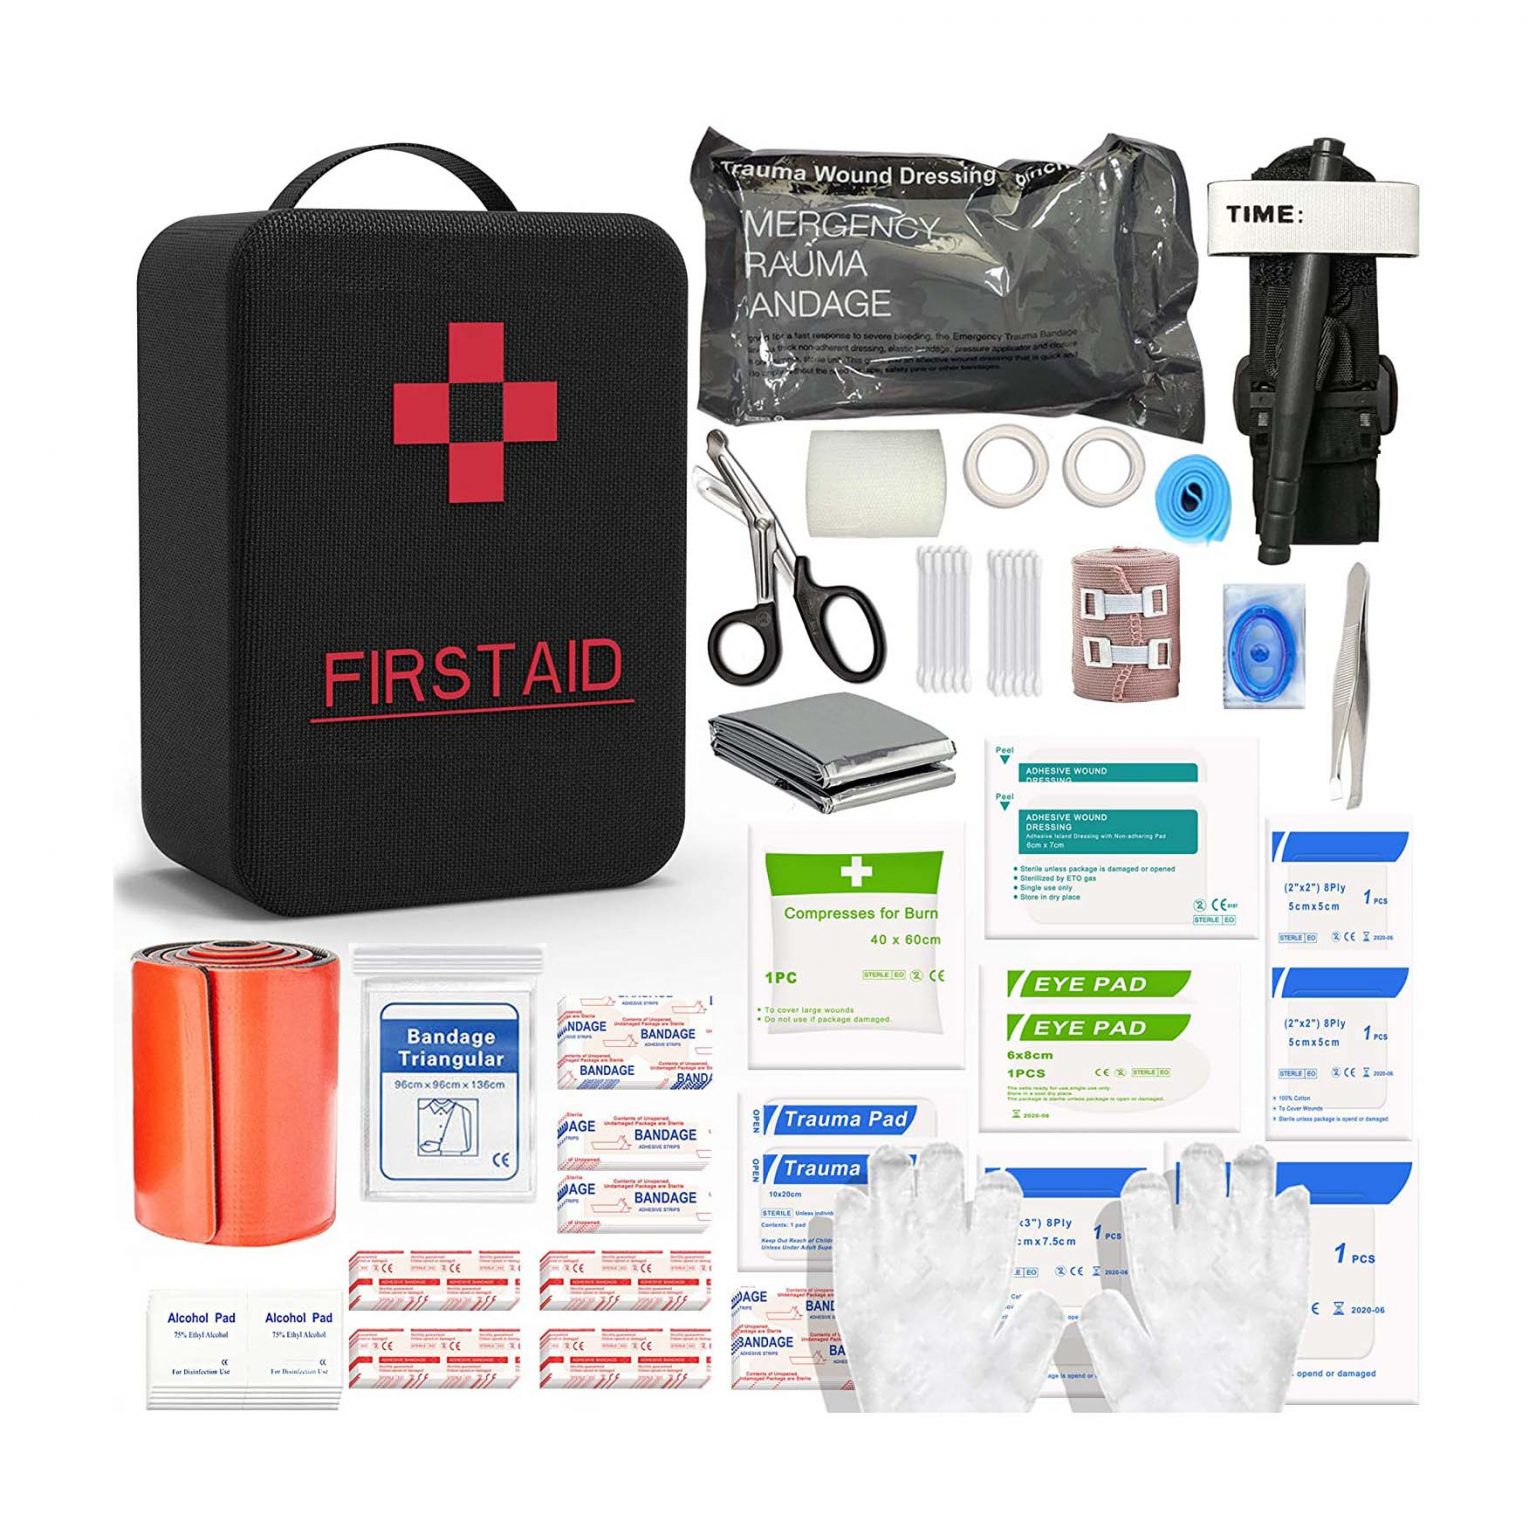 Best First Aid Kits for Home Use in 2022